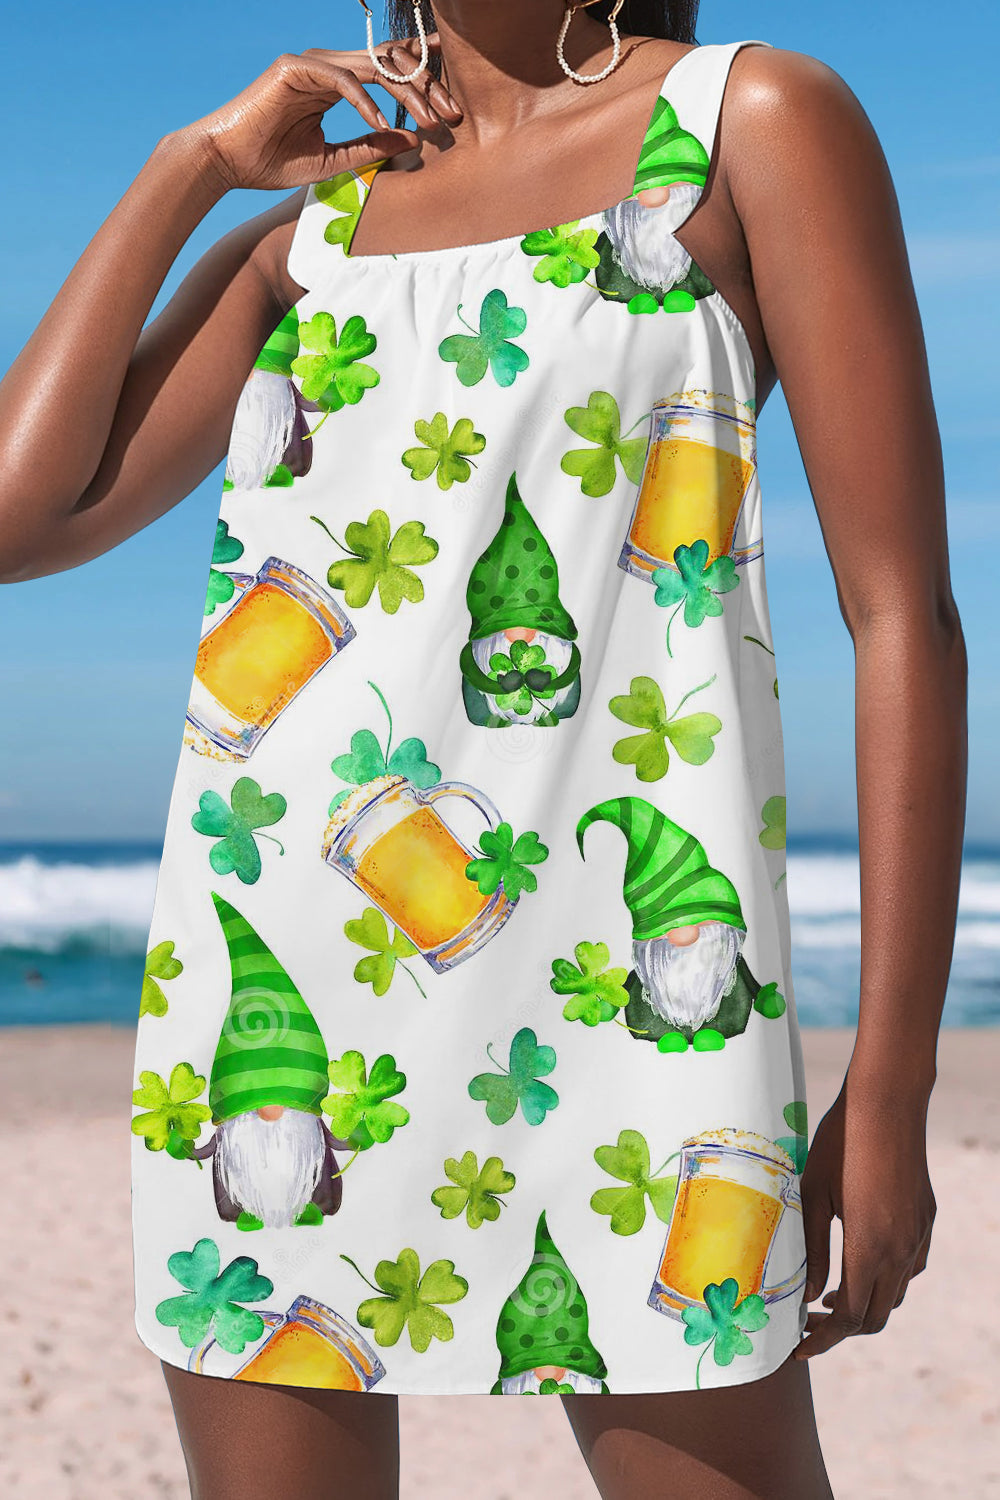 3 Fairy Clover And Beer Cute Goblins Cami Dress